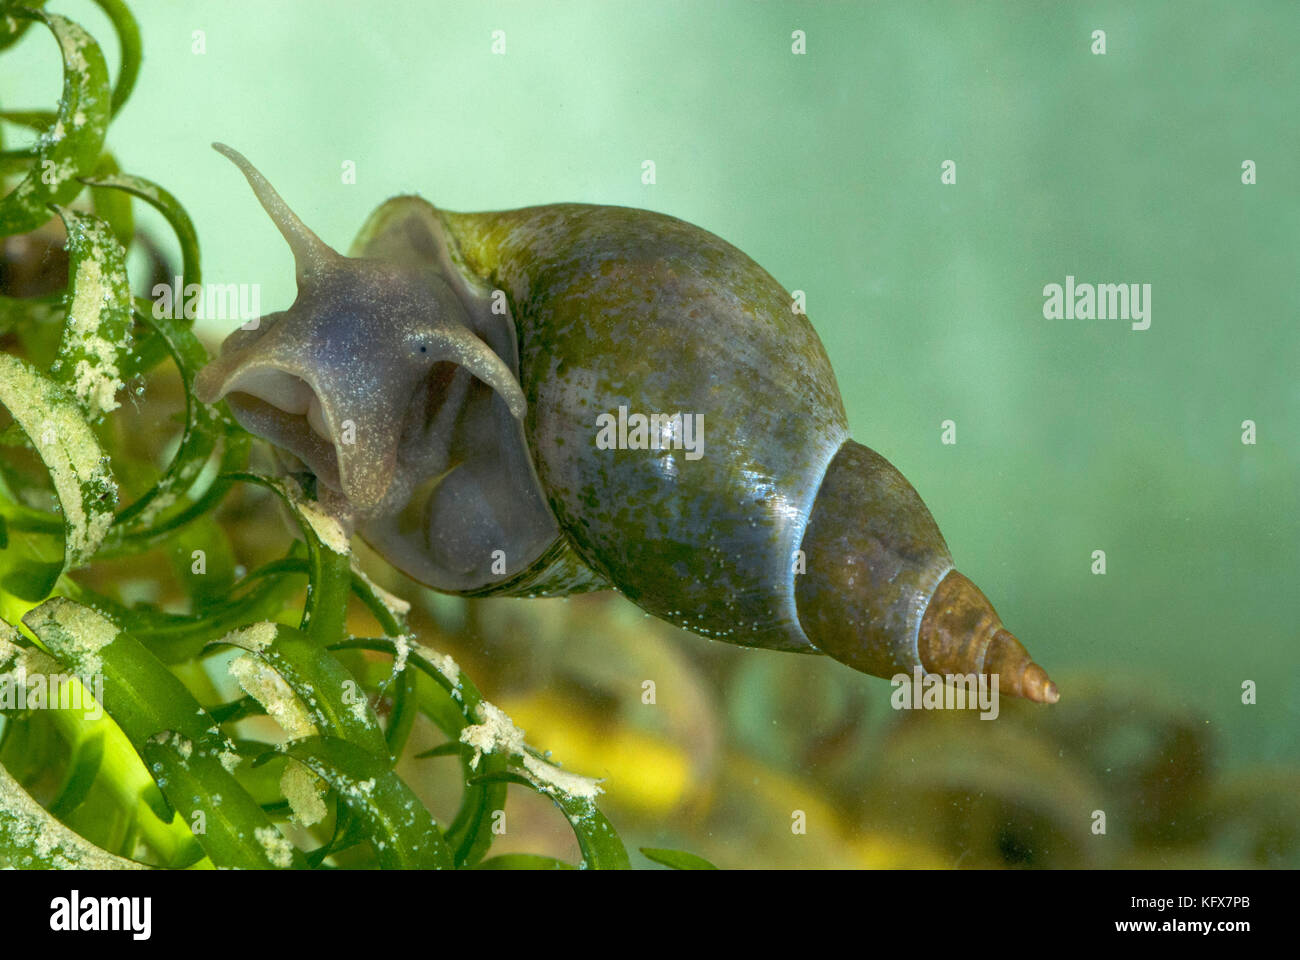 Great Pond Snail, Lymnaea stagnalis, underwater on weed, largest freshwater pulmonates, can obtain oxygen from the air from surface using simple lung Stock Photo